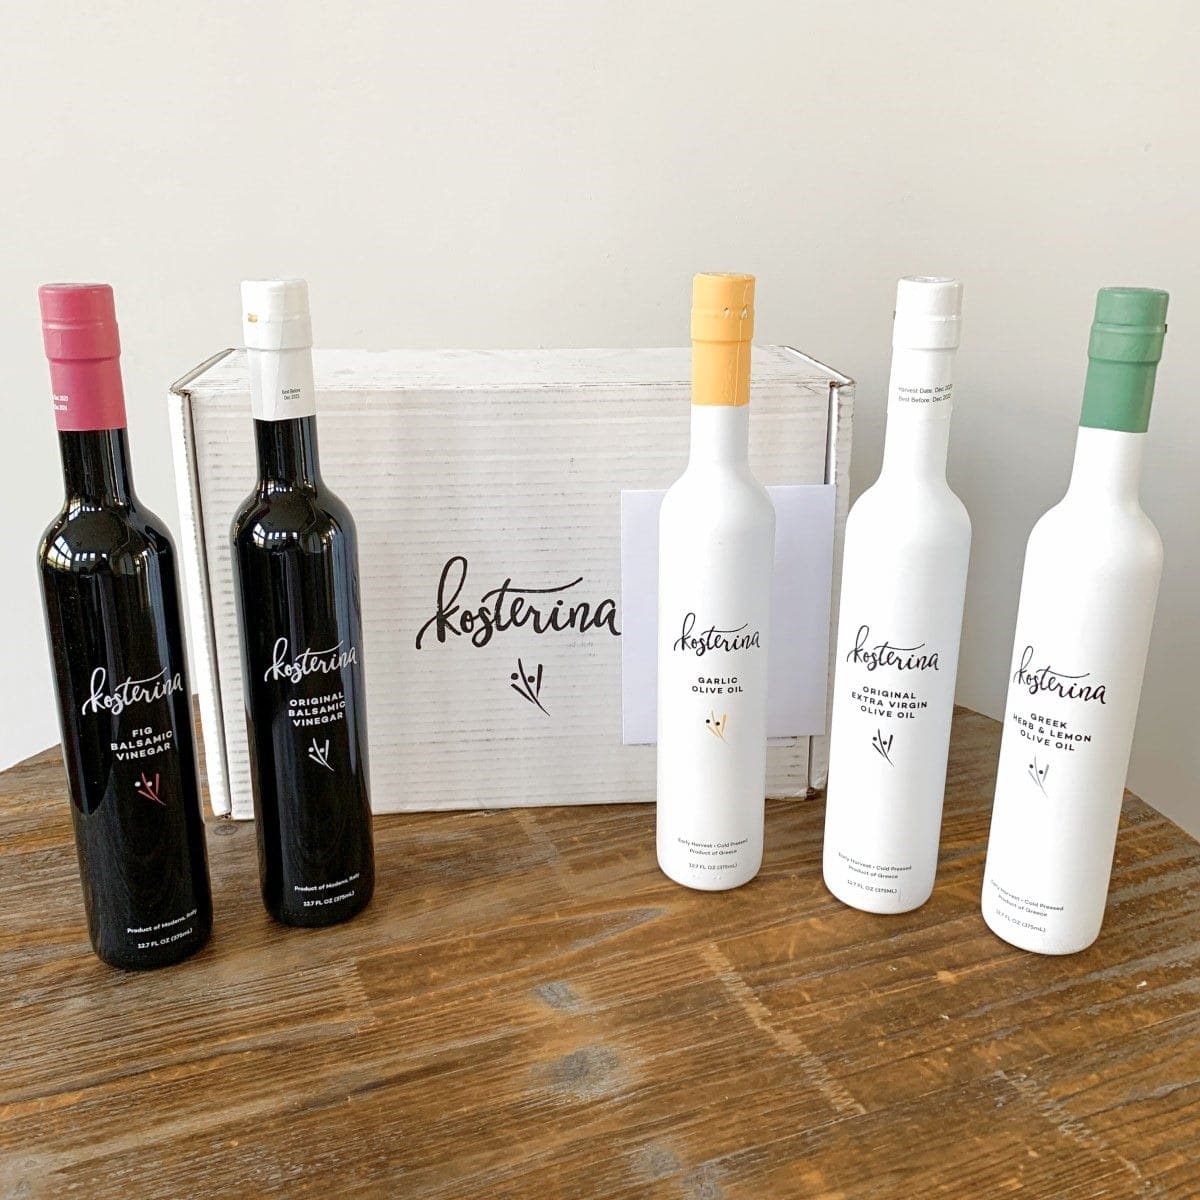 Kosterina Olive Oil Subscription Review 016